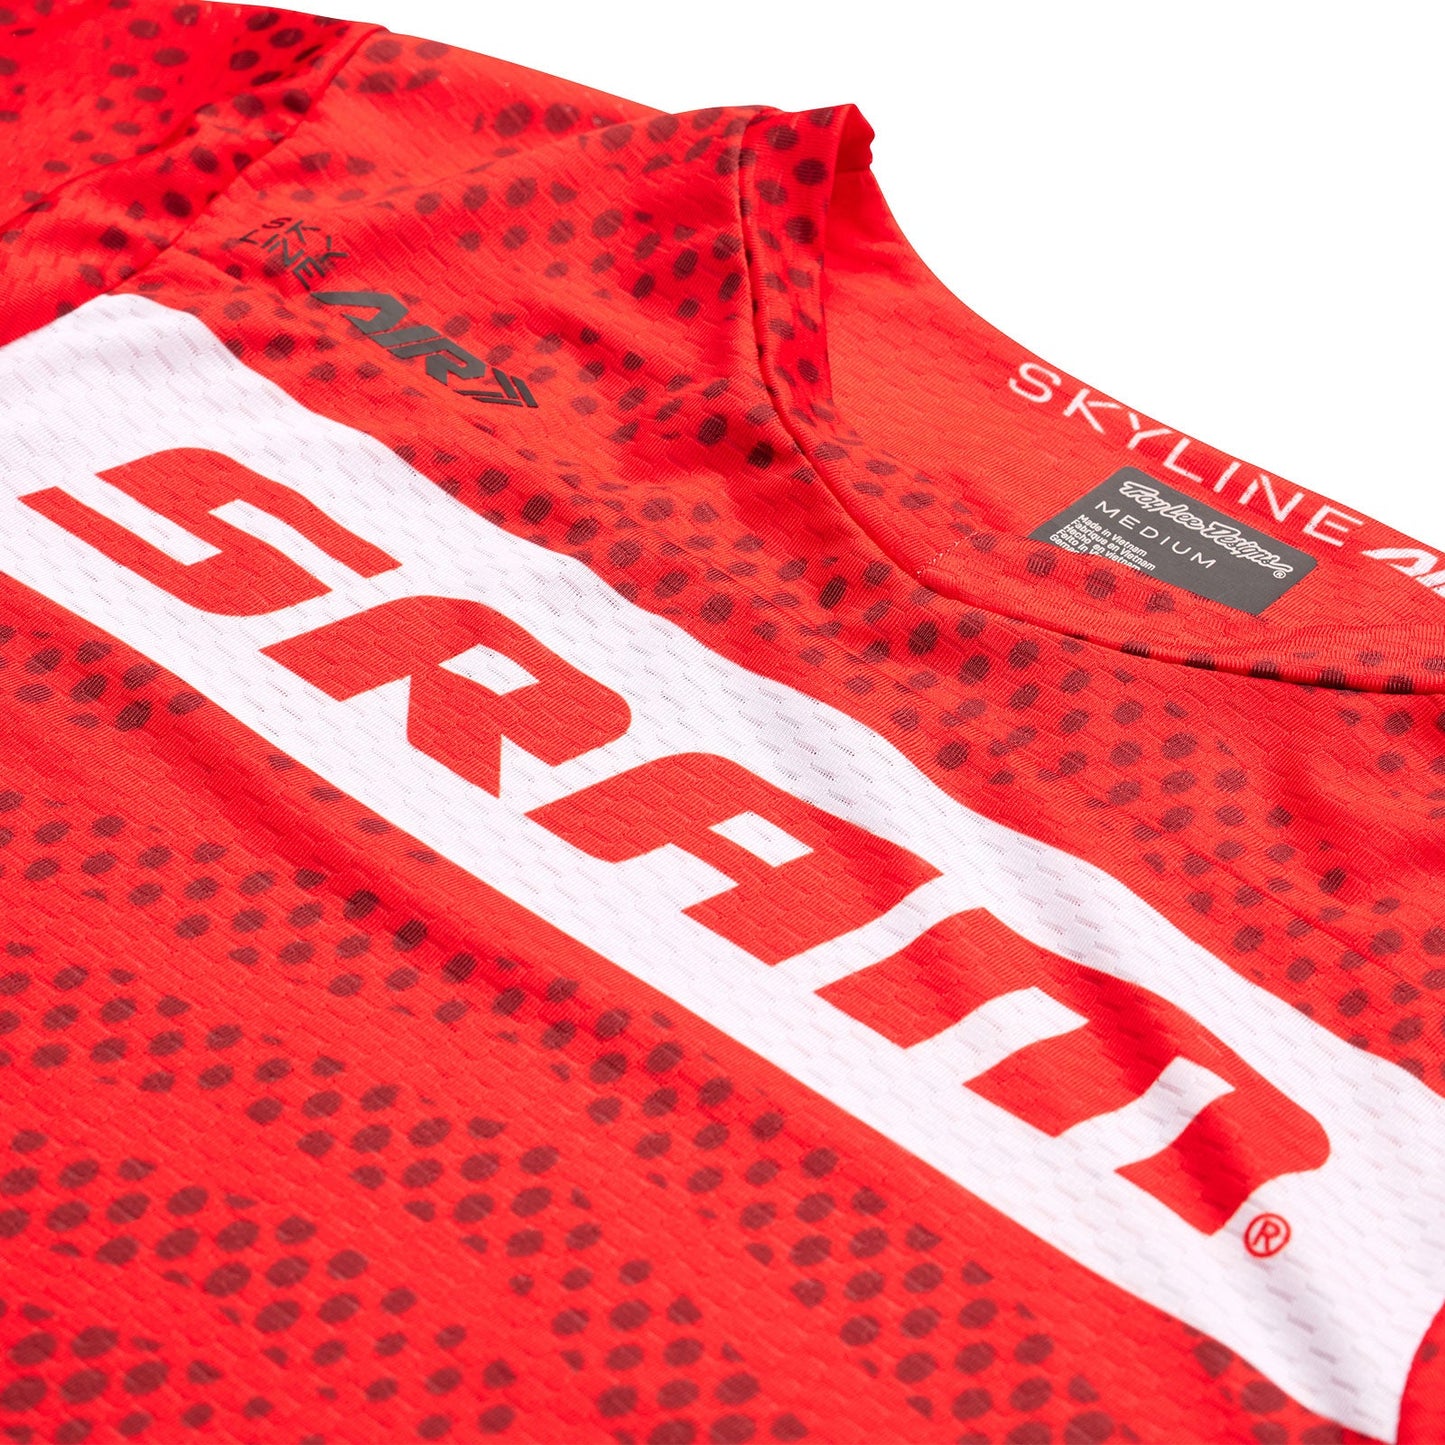 Troy Lee Skyline Air SS Jersey SRAM Roots Fiery Red